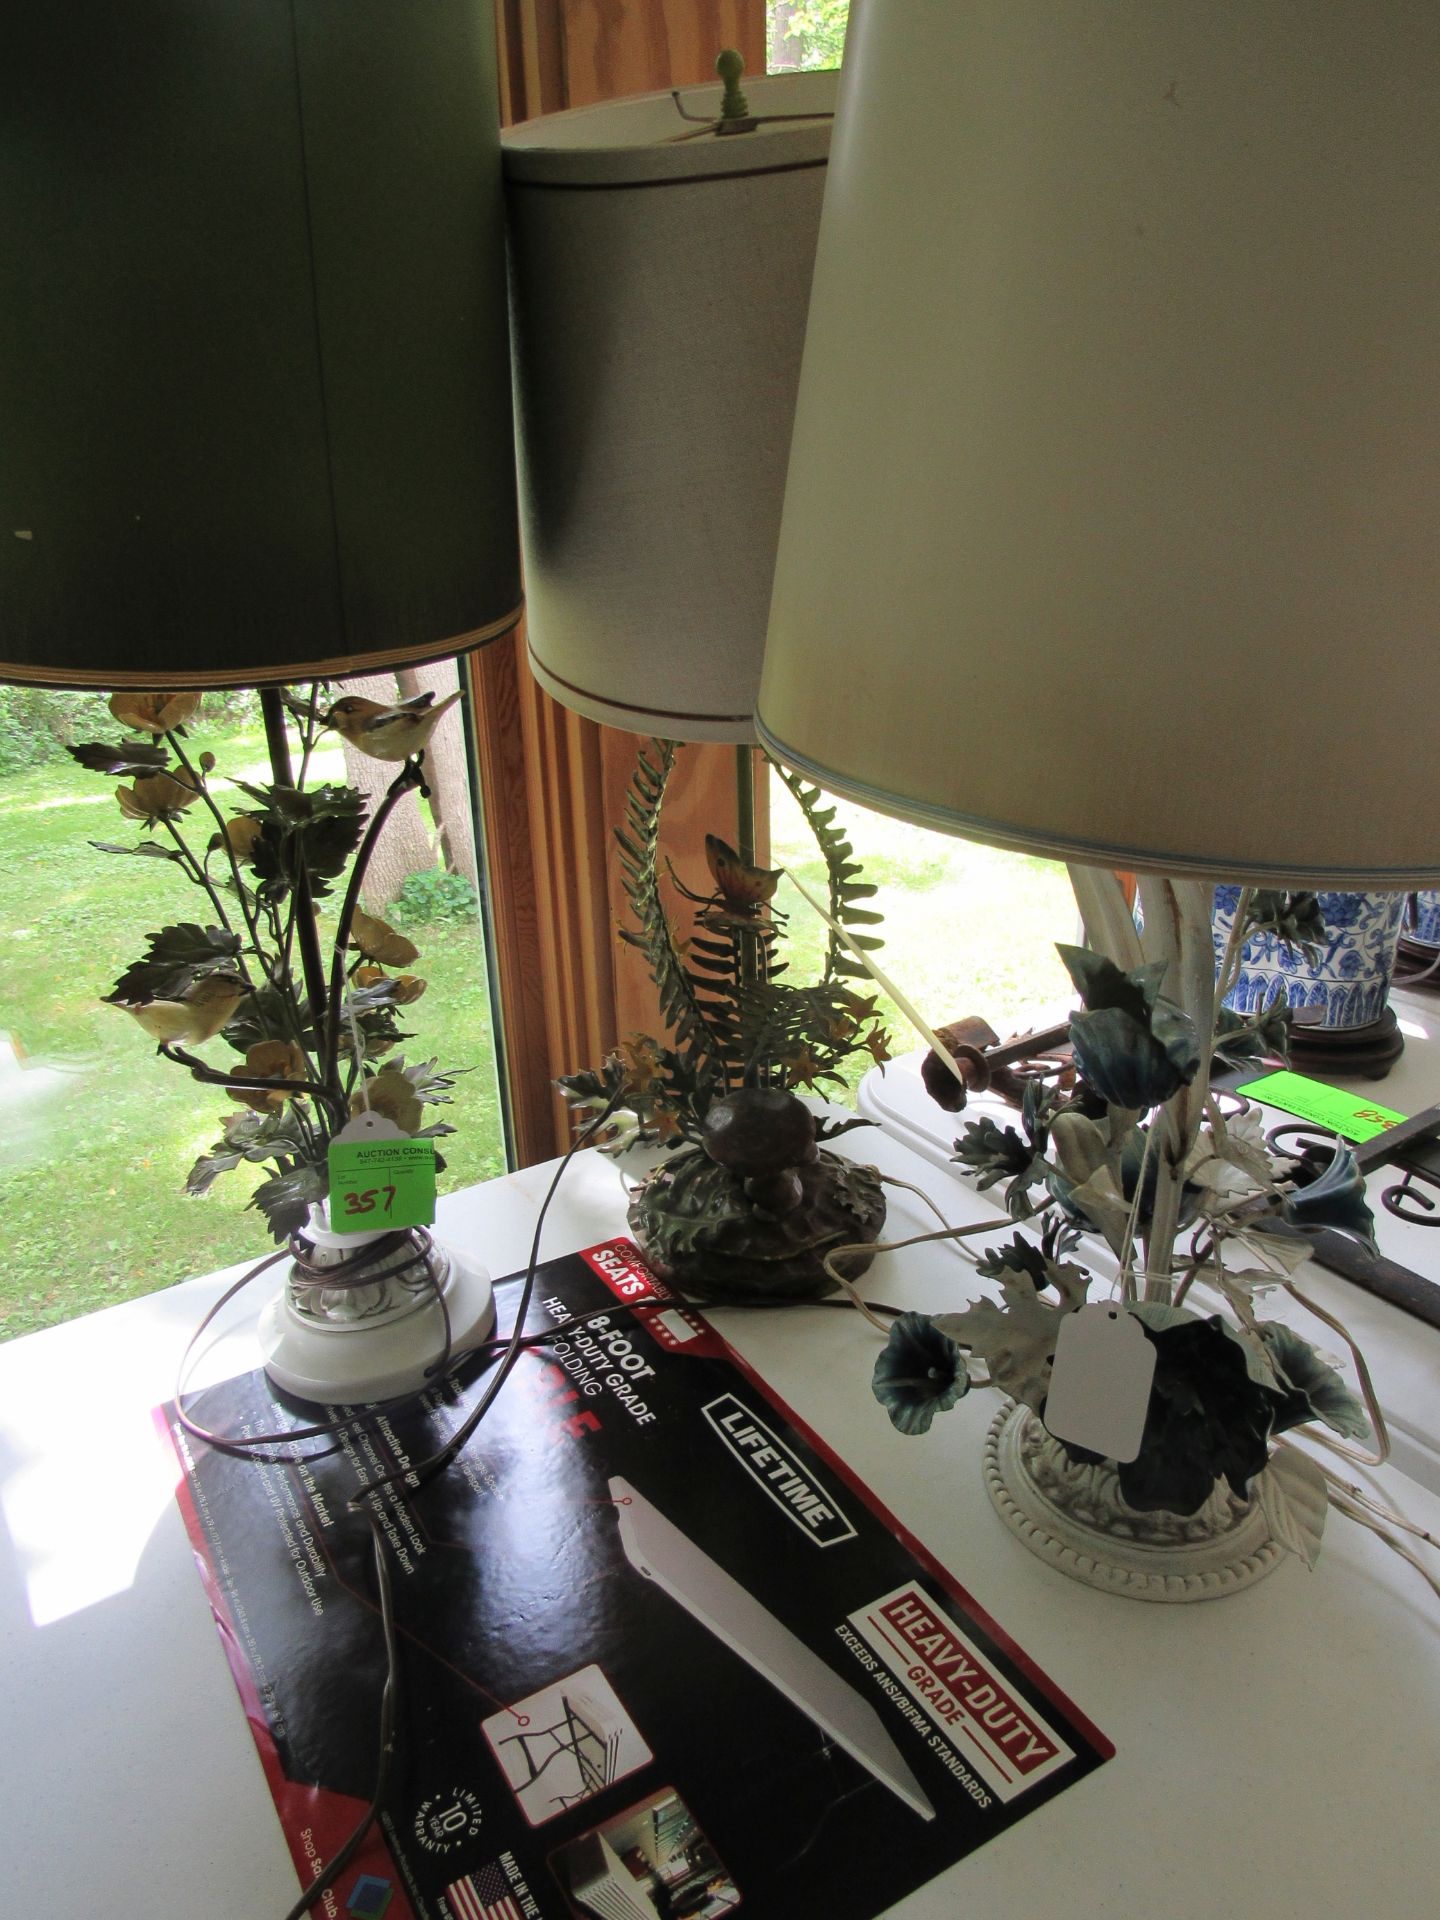 Three floral style table lamps